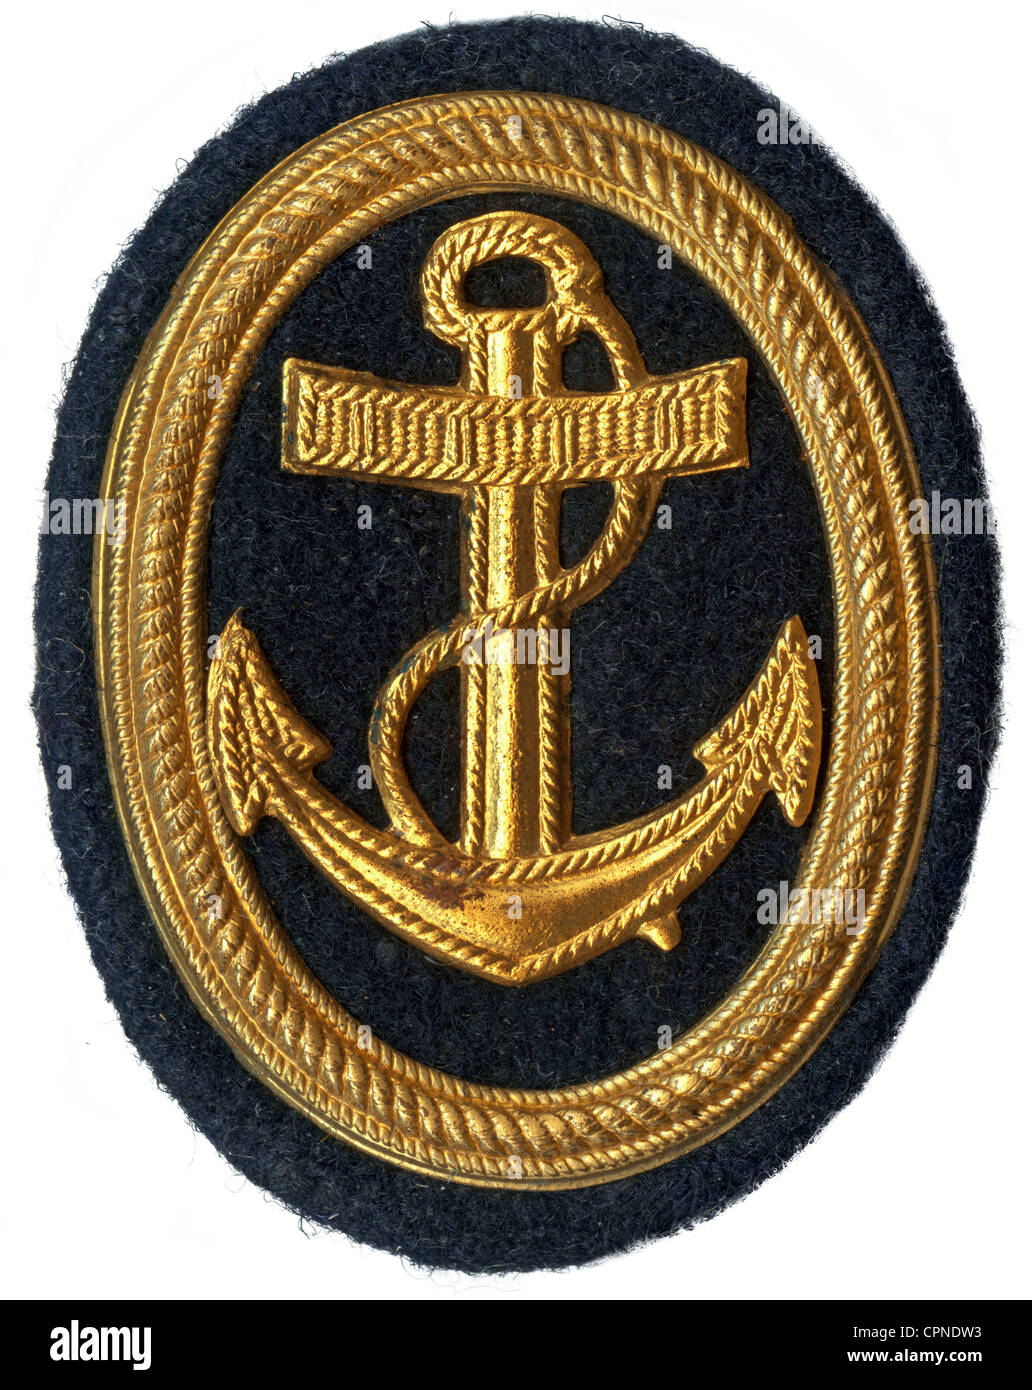 WO Prison  UK Badges New graphic  navy　M